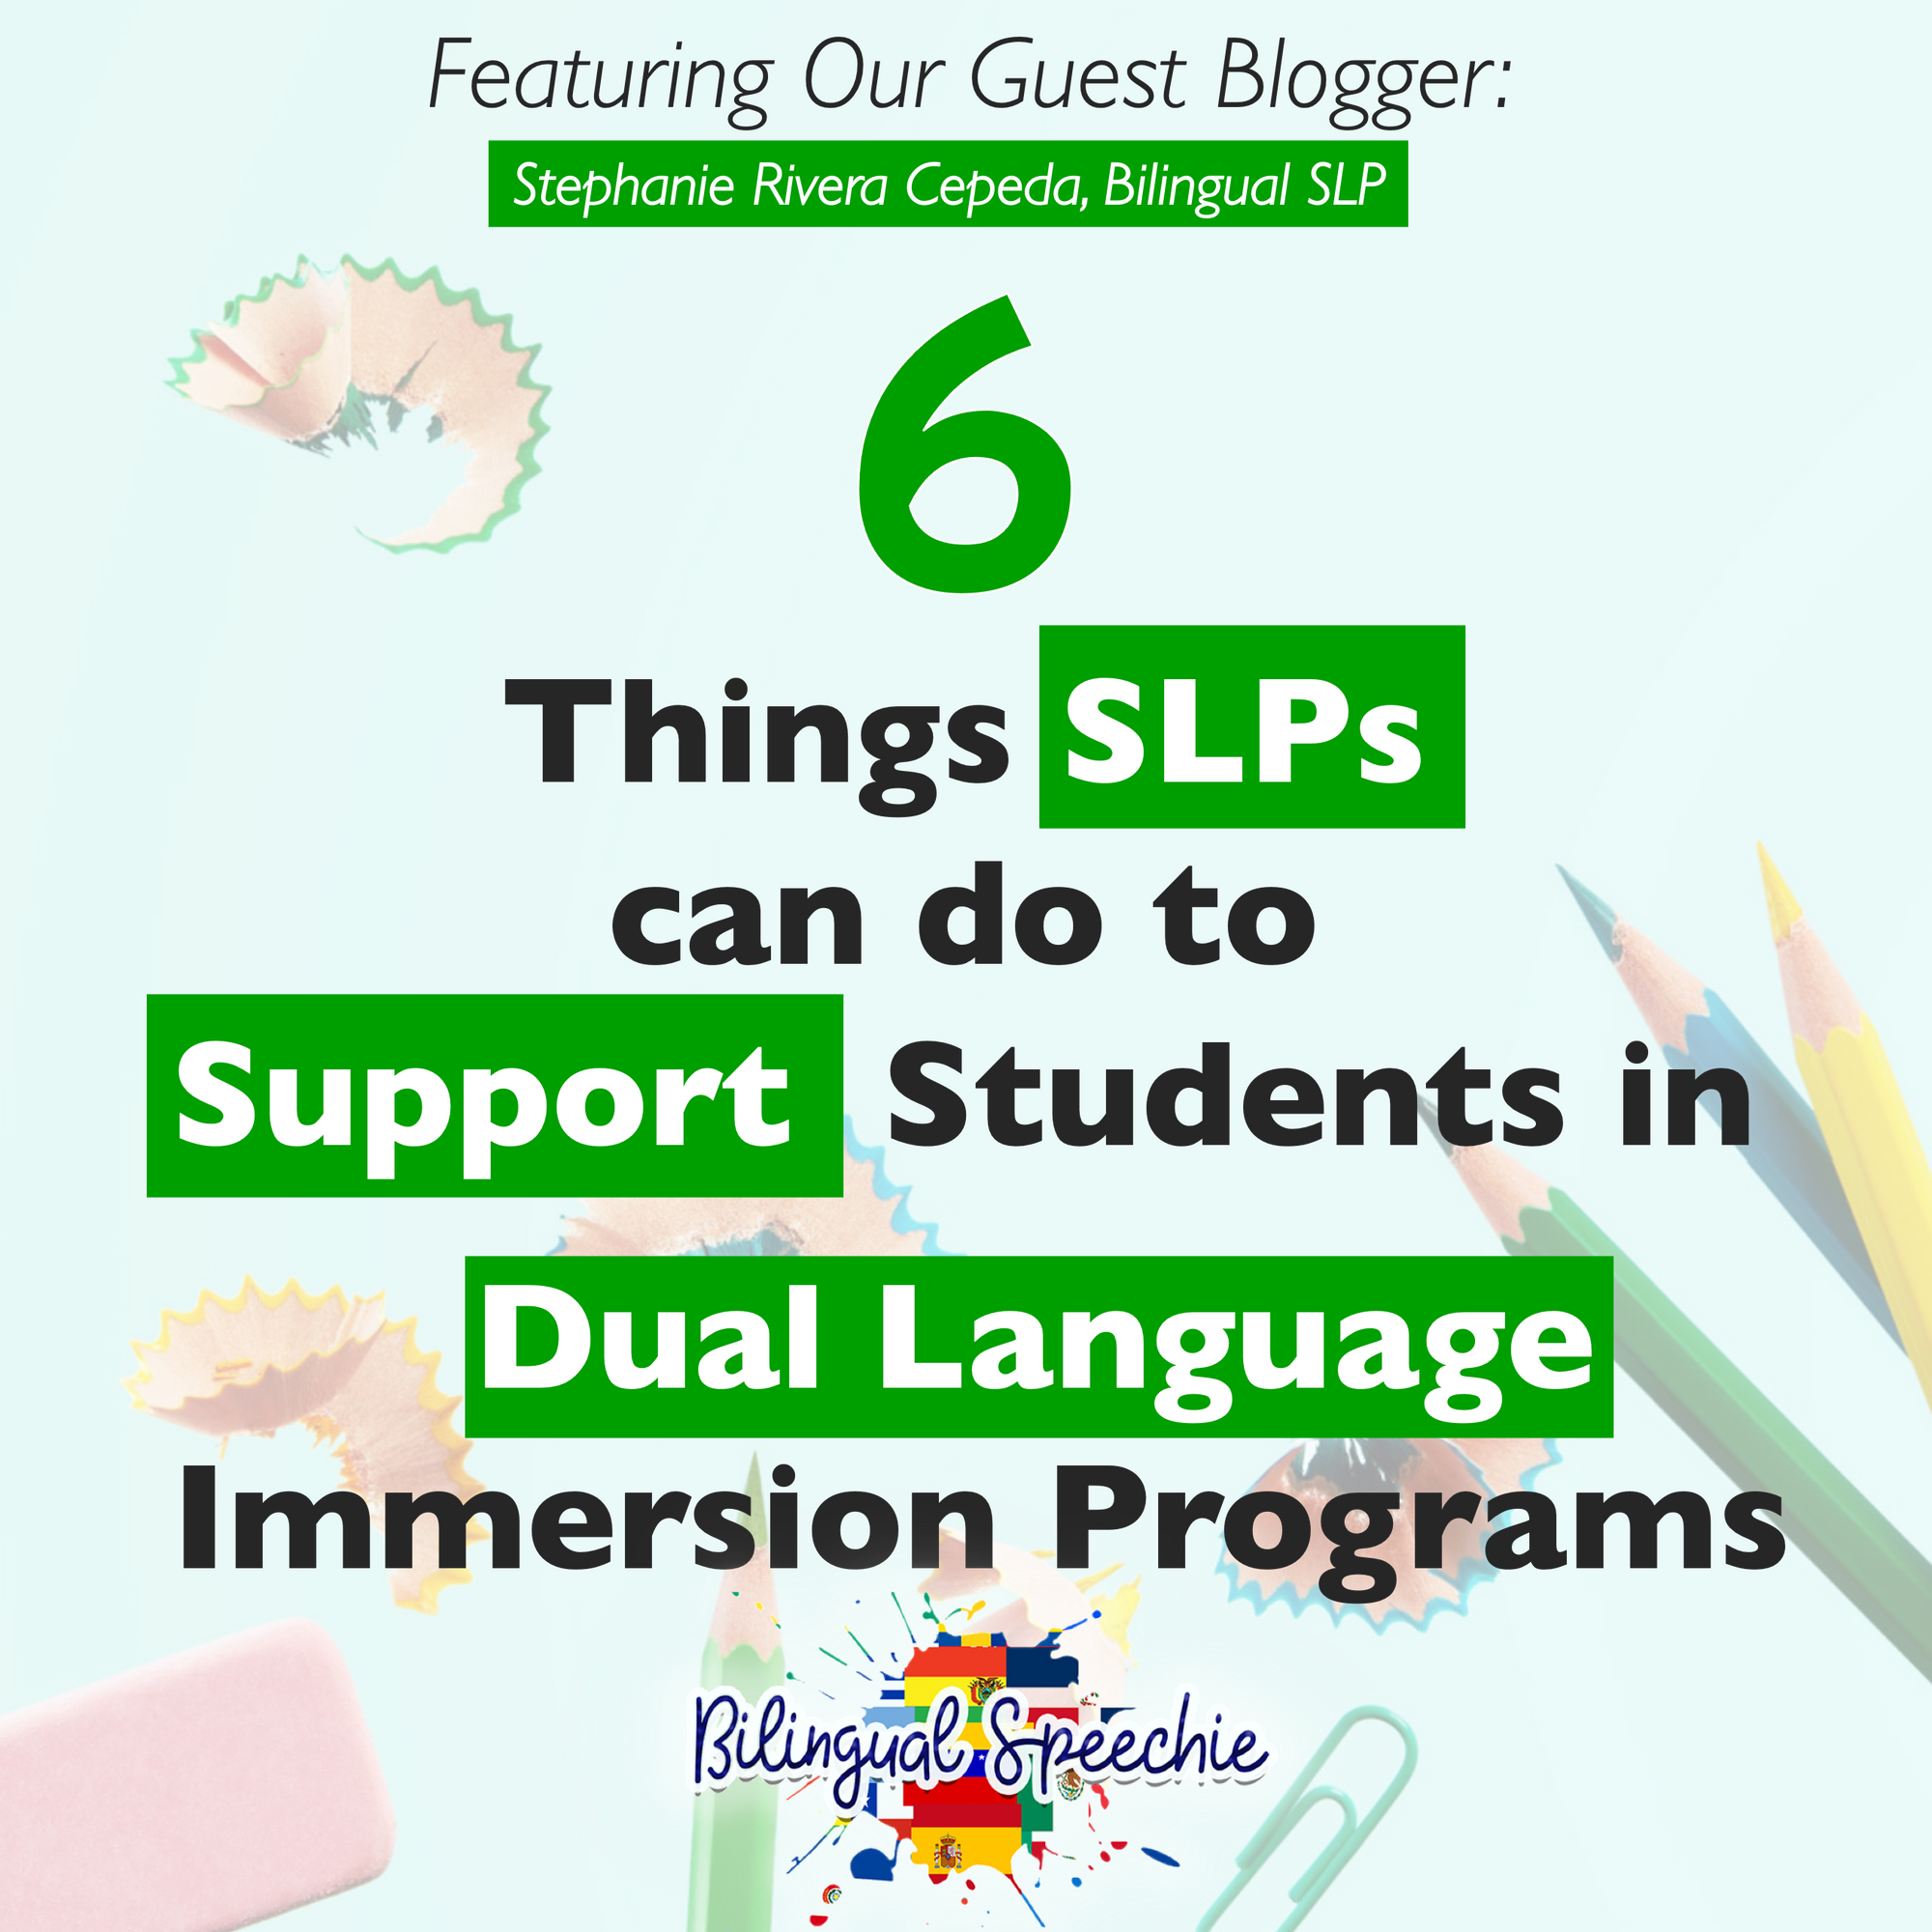 6 Things SLPs Can Do To Support Students in Dual Language Immersion Programs